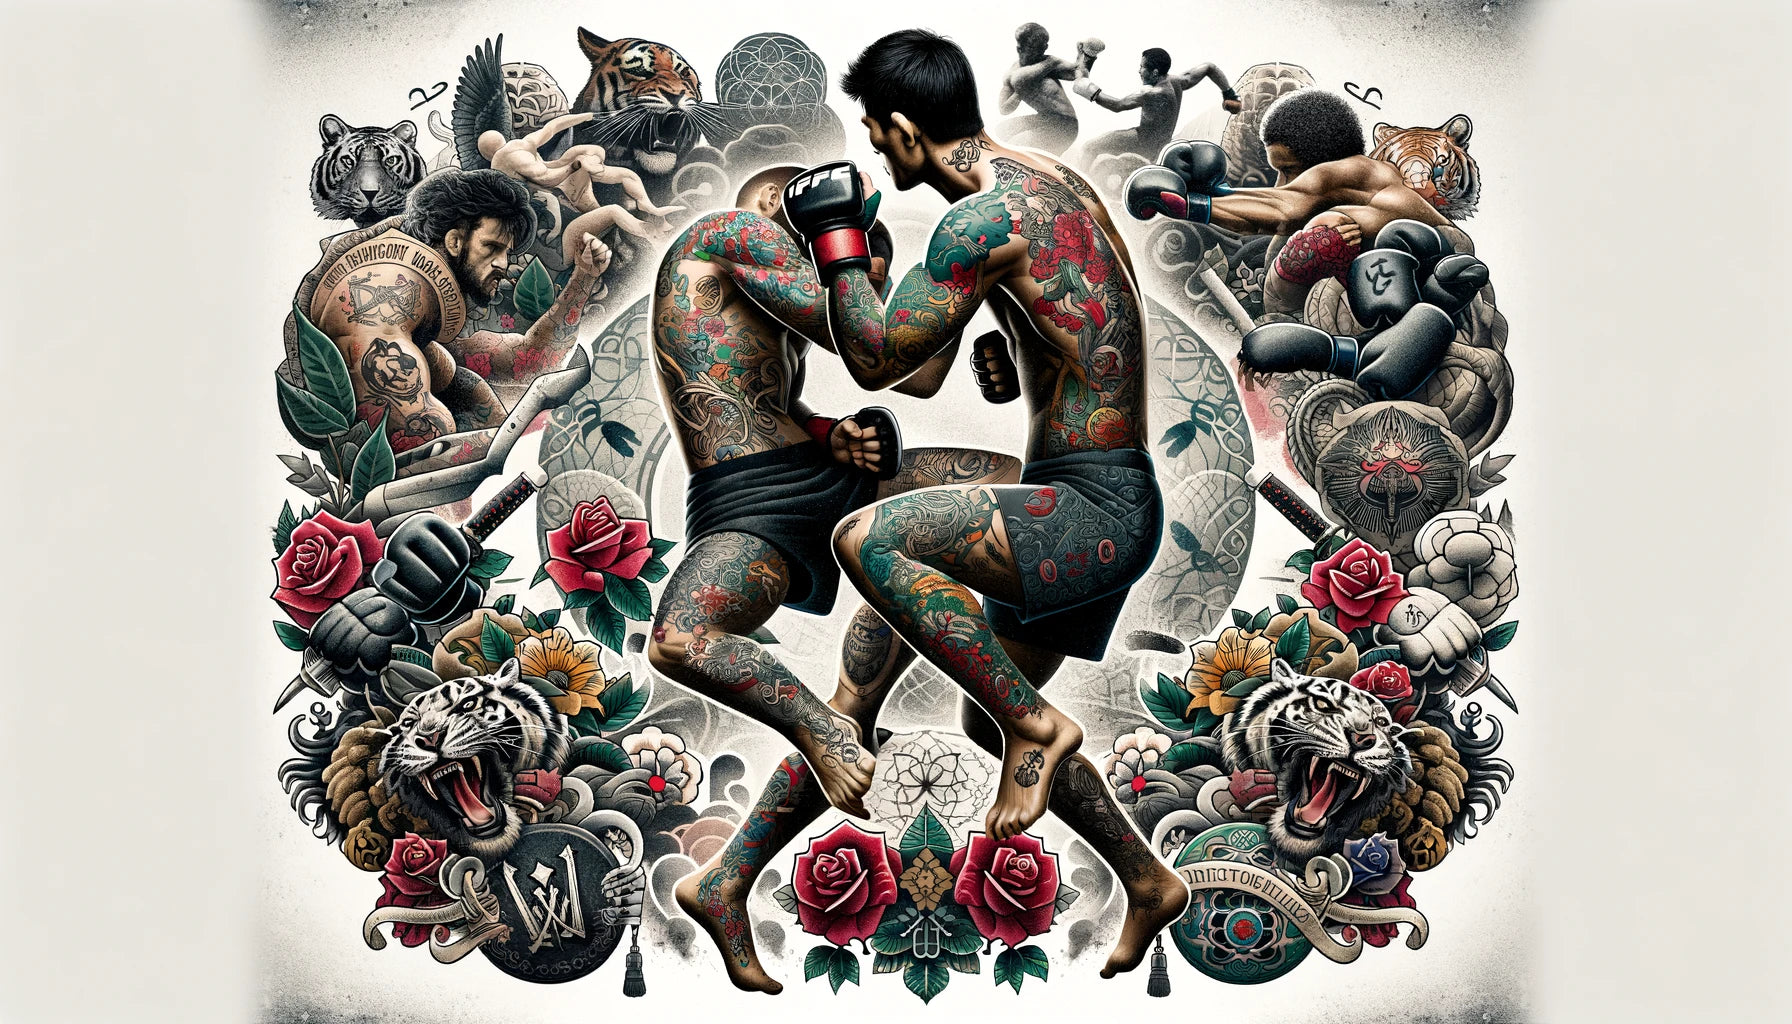 The Art of Combat: Gun MMA Fighters with Awesome Tattoos - Past and Present